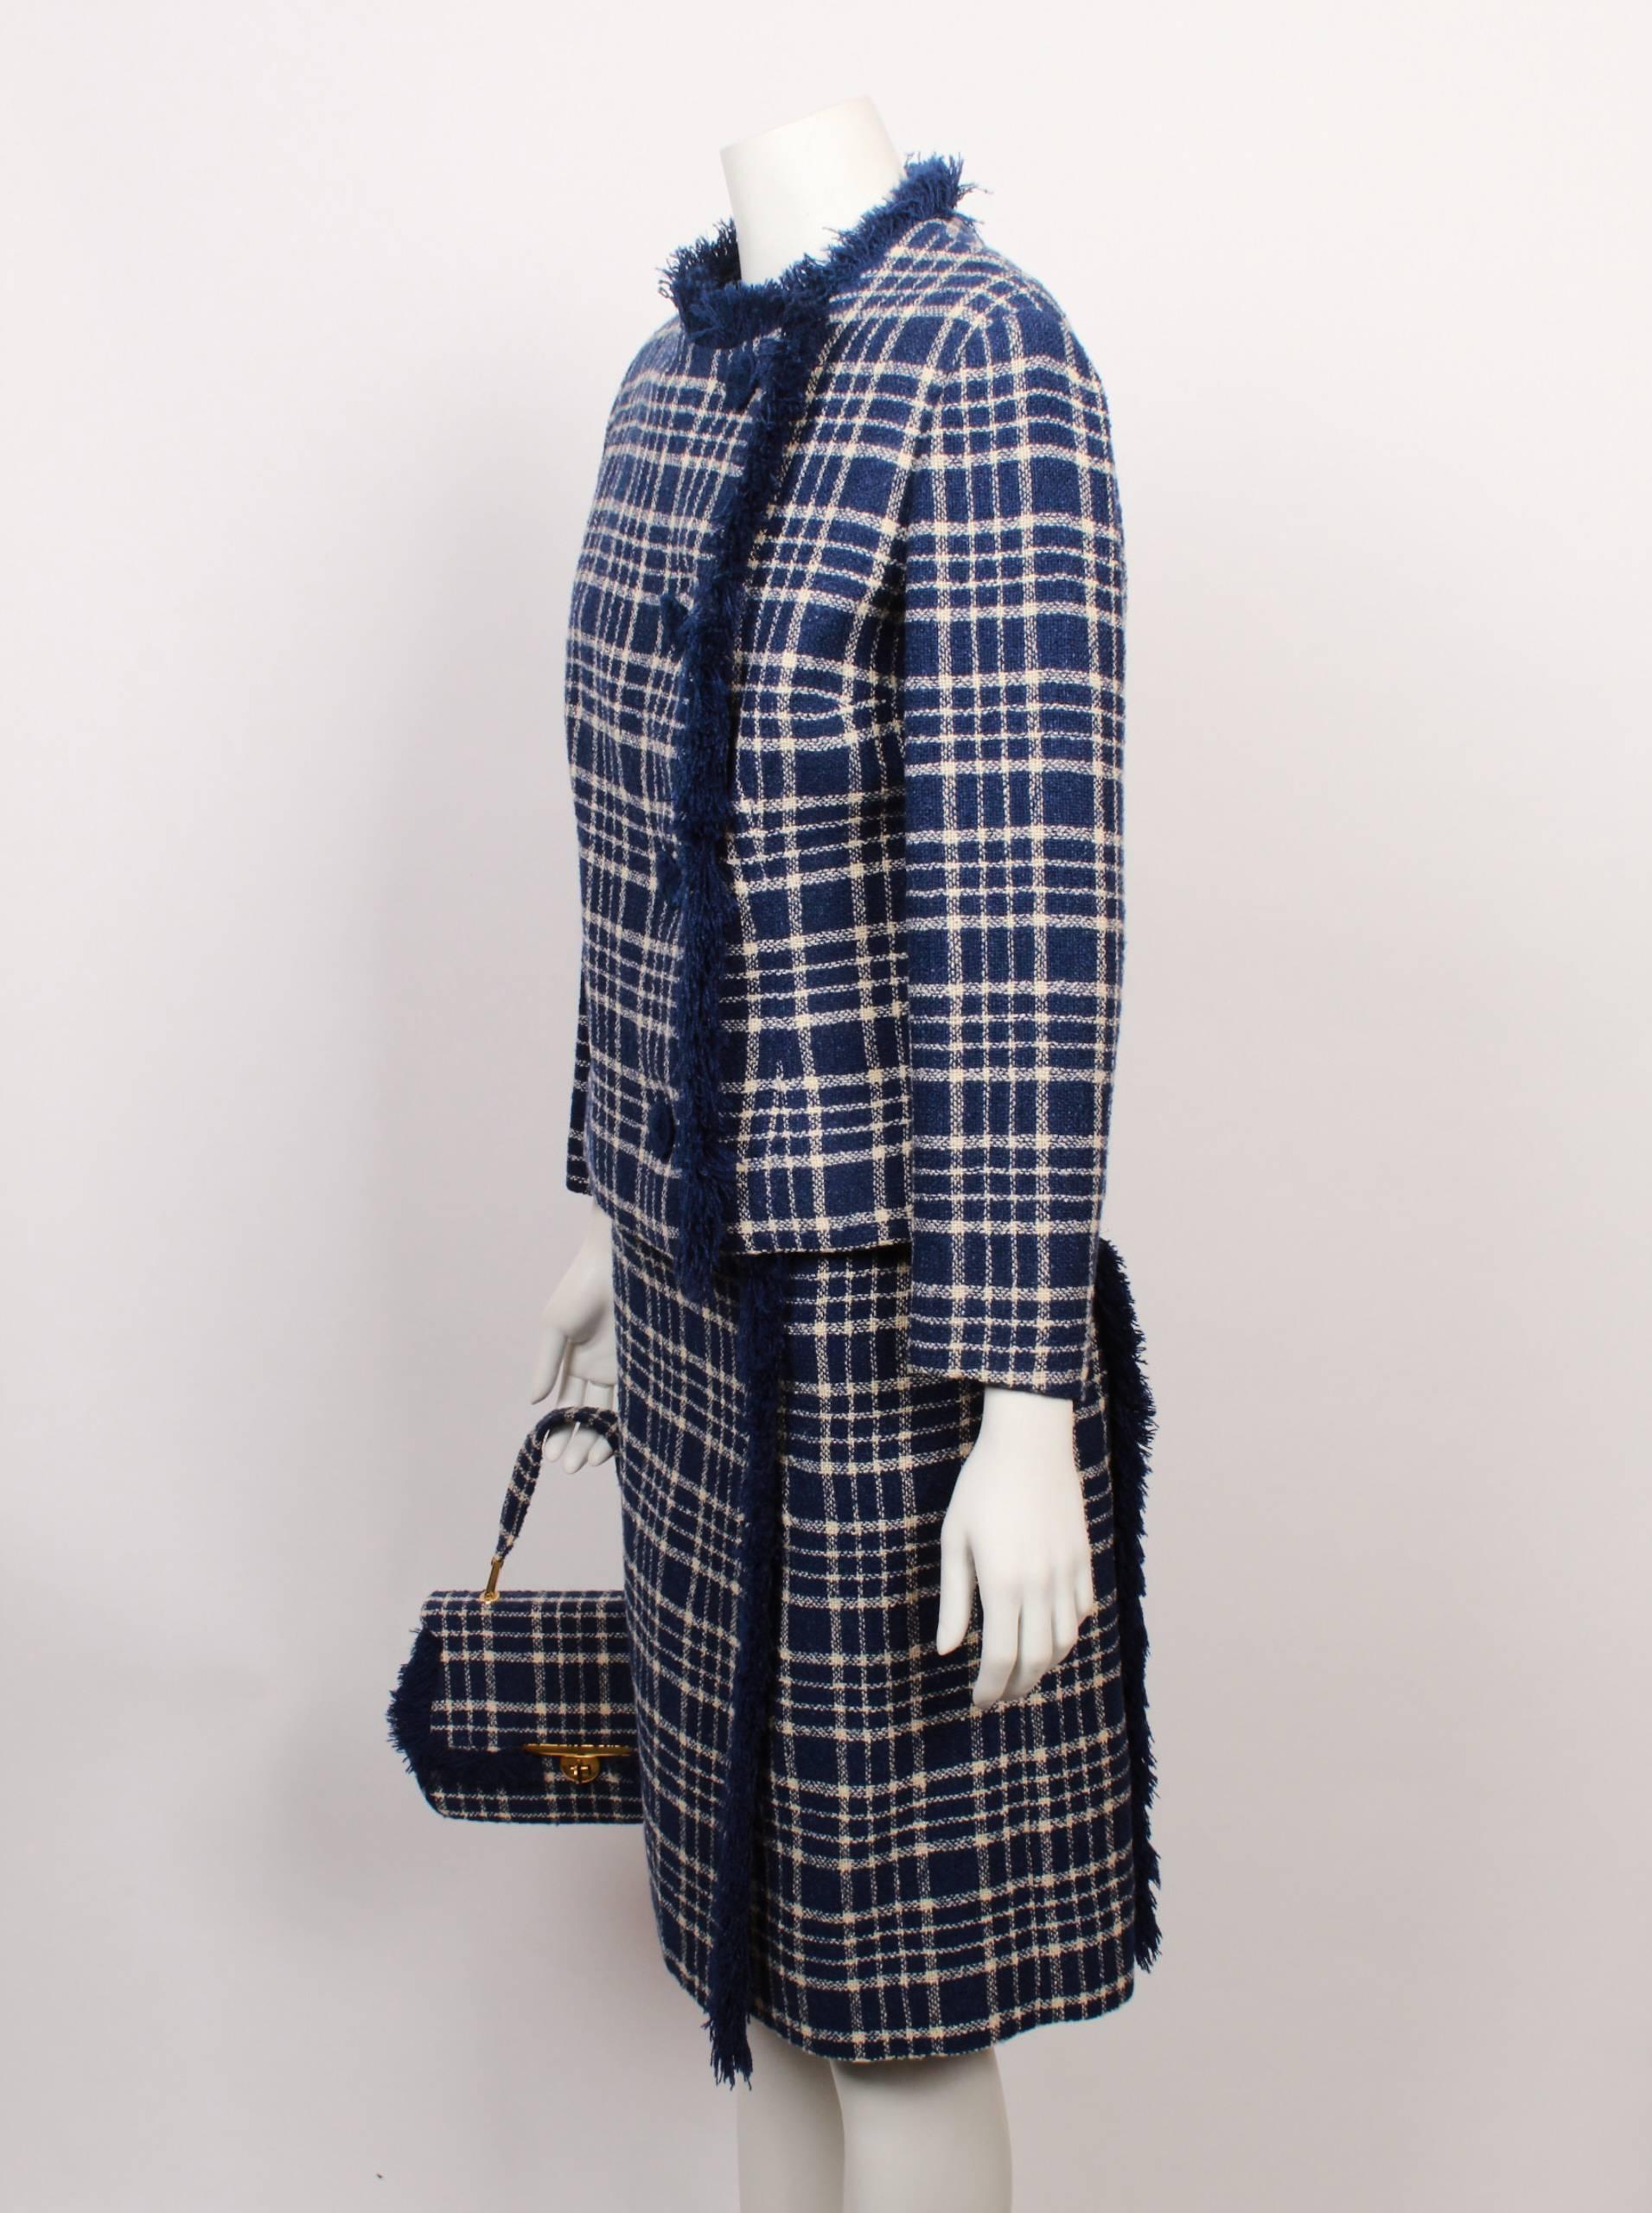 Amazing Le Louvre Melbourne couture blue and white checked tweed 3 piece ensemble consisting of a jacket, skirt and matching self fabric hand bag. 
Made in the 1960s from imported European fabric by the famous Melbourne boutique Le Louvre. Most